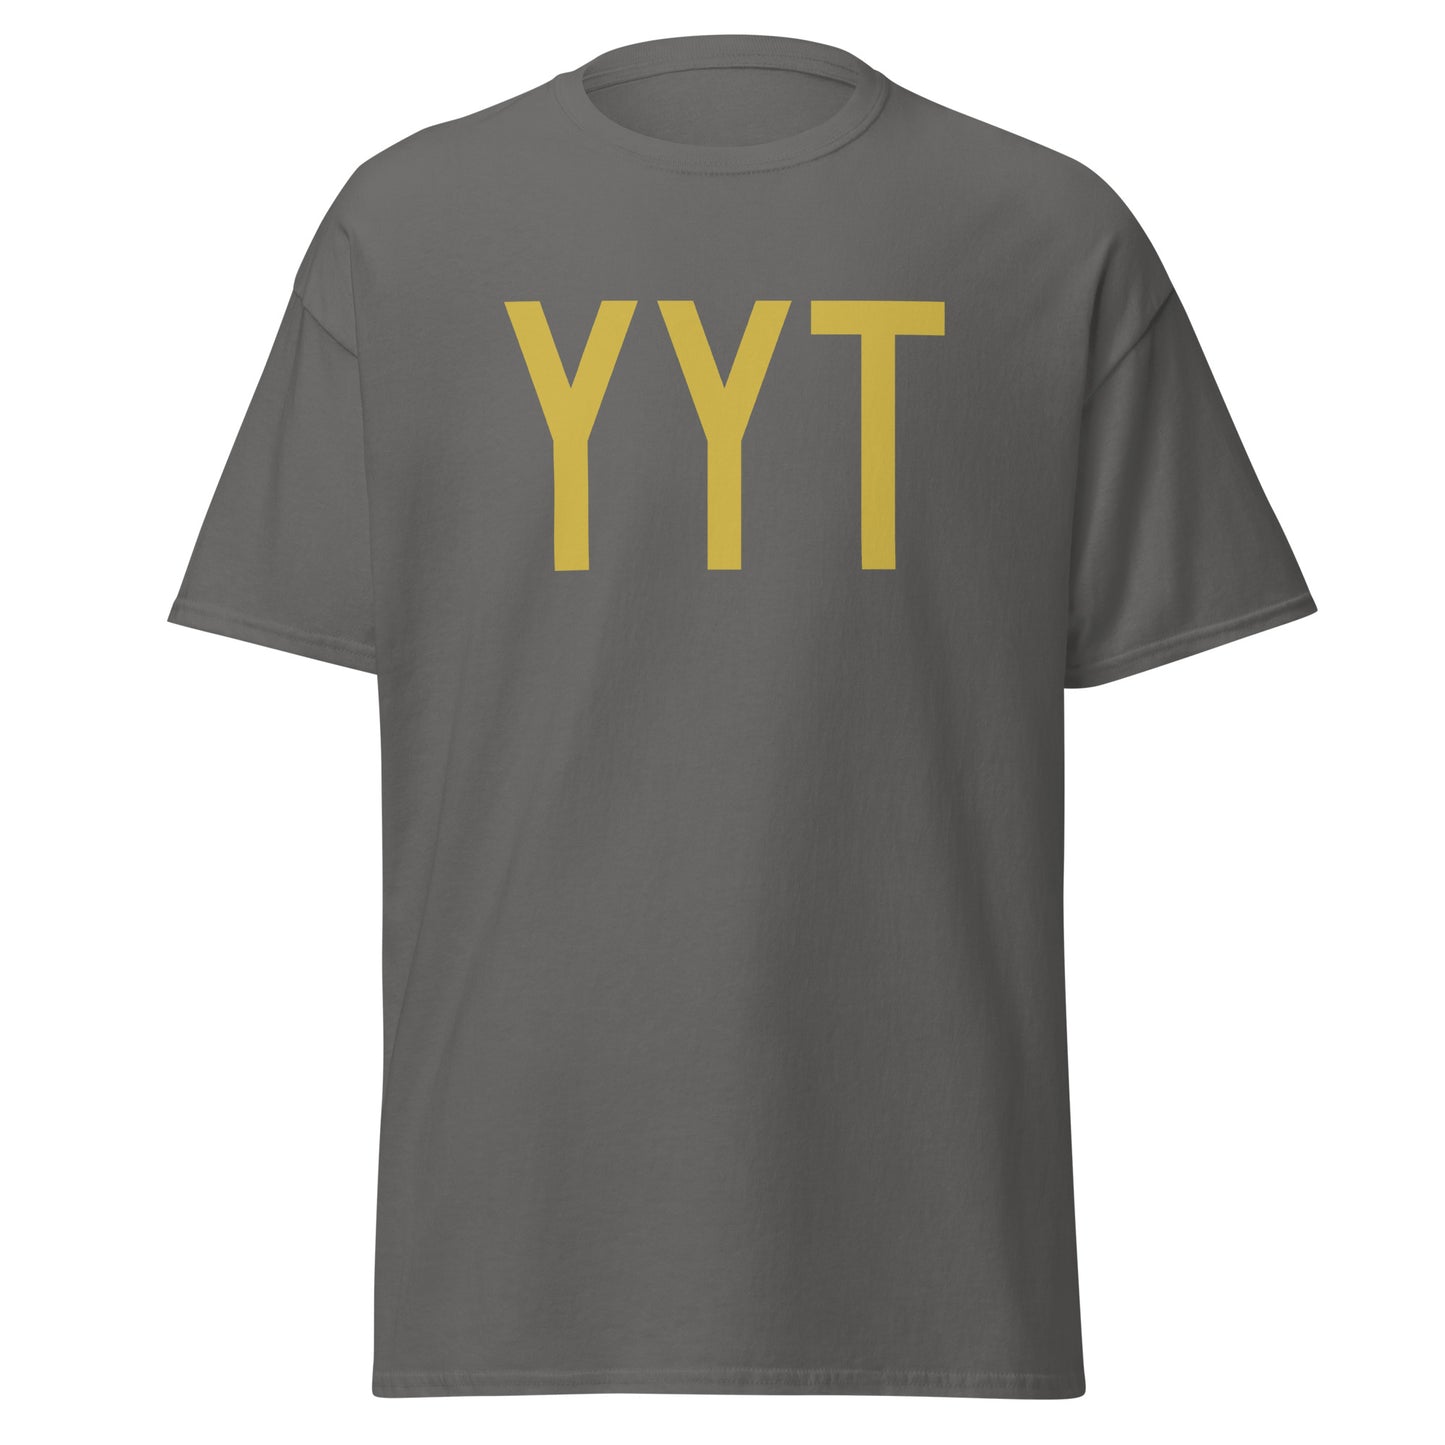 Aviation Enthusiast Men's Tee - Old Gold Graphic • YYT St. John's • YHM Designs - Image 05